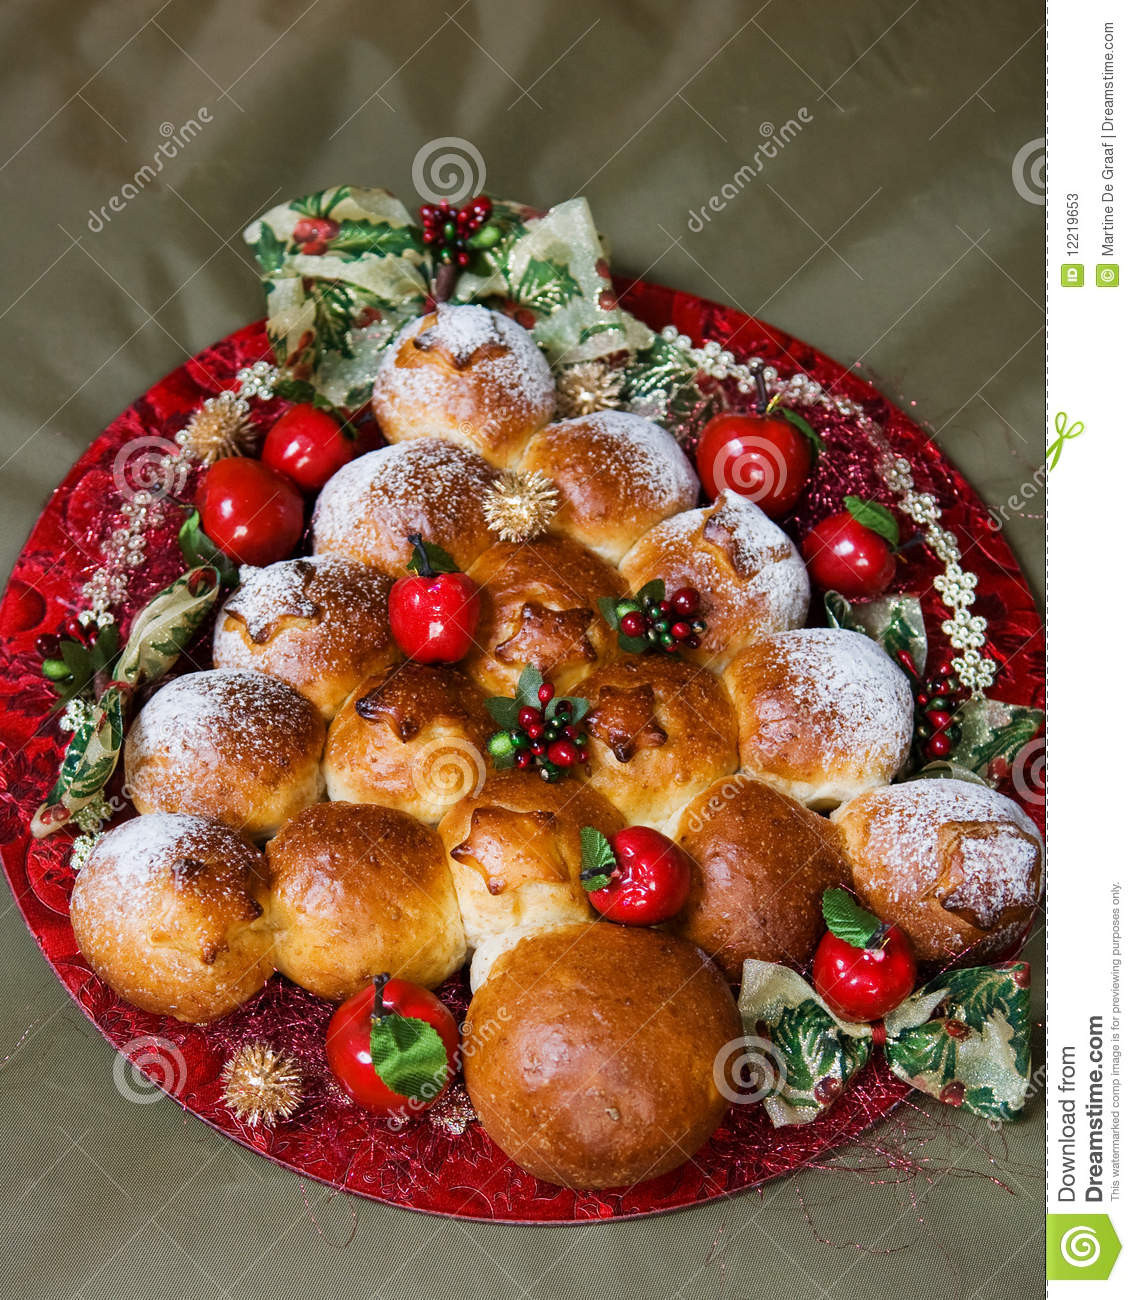 Christmas Tree Bread Rolls
 Christmas Bread Rolls stock image Image of baked lunch